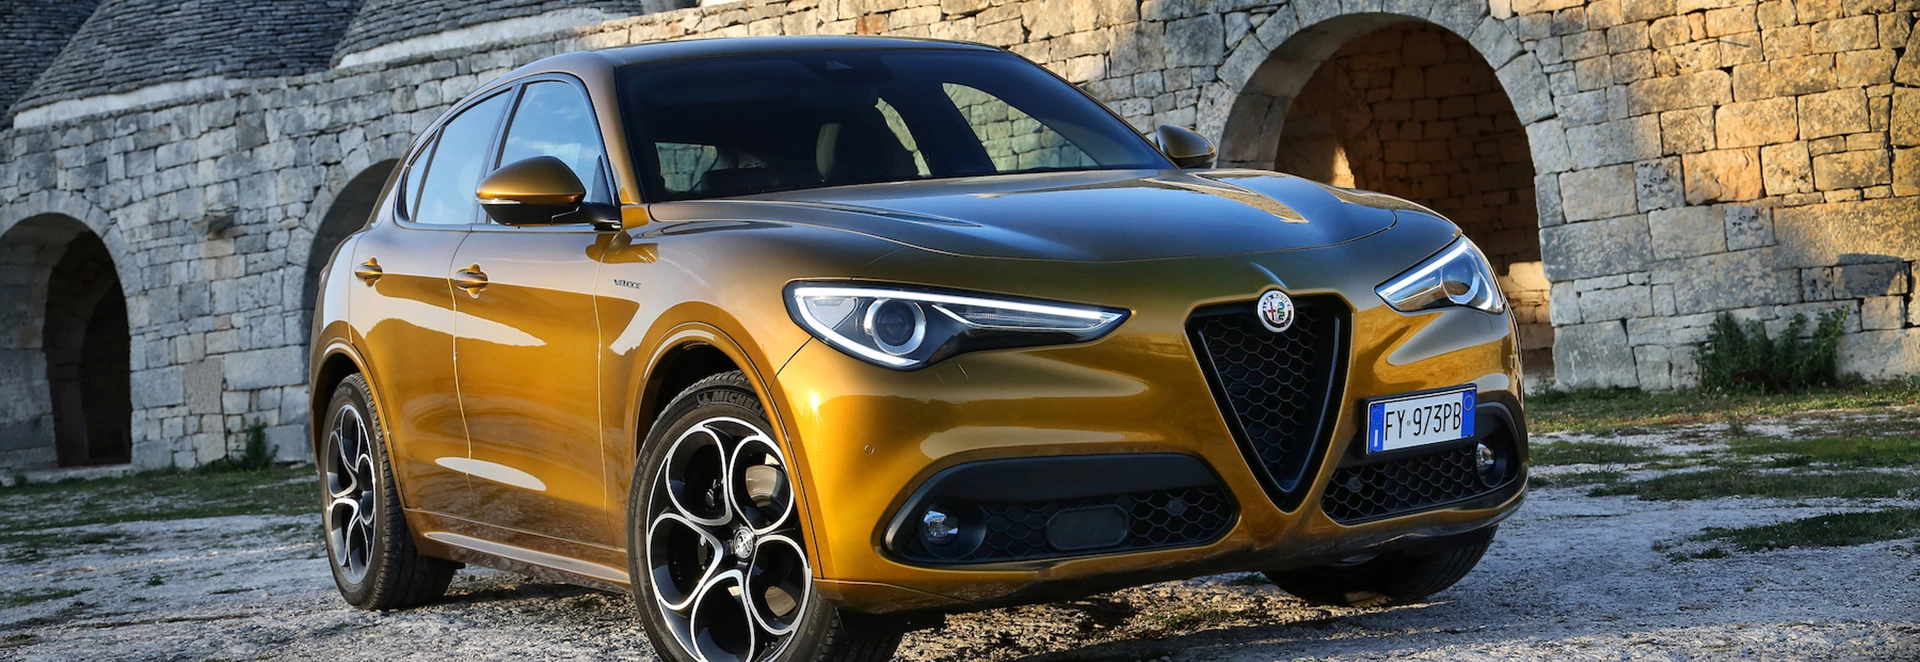 5 reasons why the Alfa Romeo Stelvio should be on your SUV shortlist 